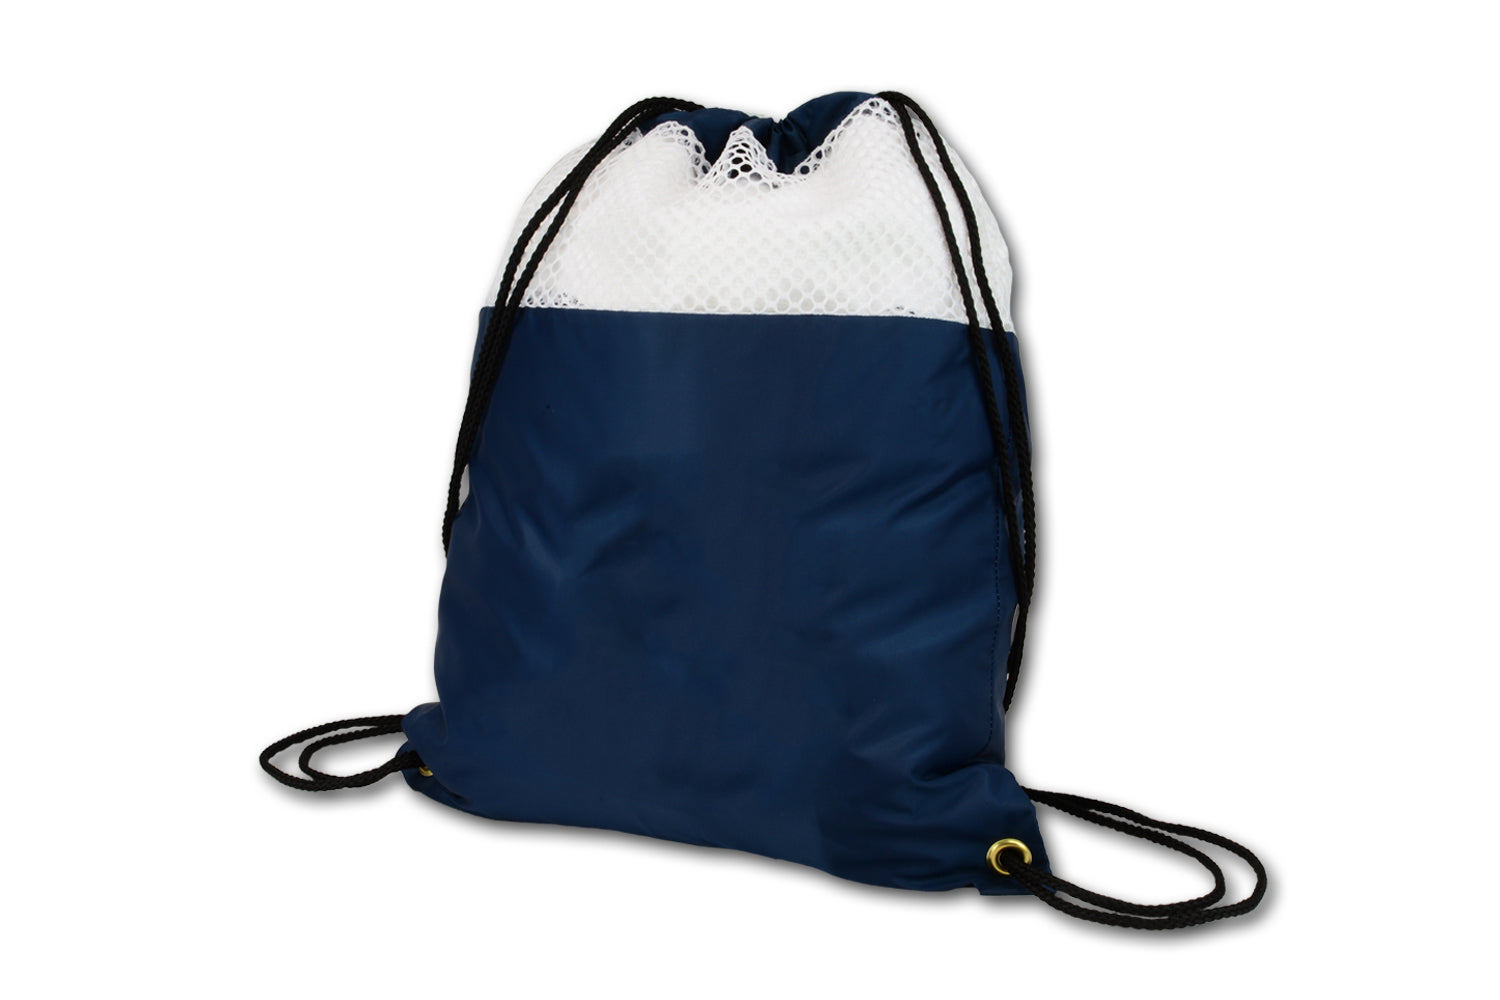 15"x20" Barrier Laundry Bag with Backpack Style Closure - Pack of 2